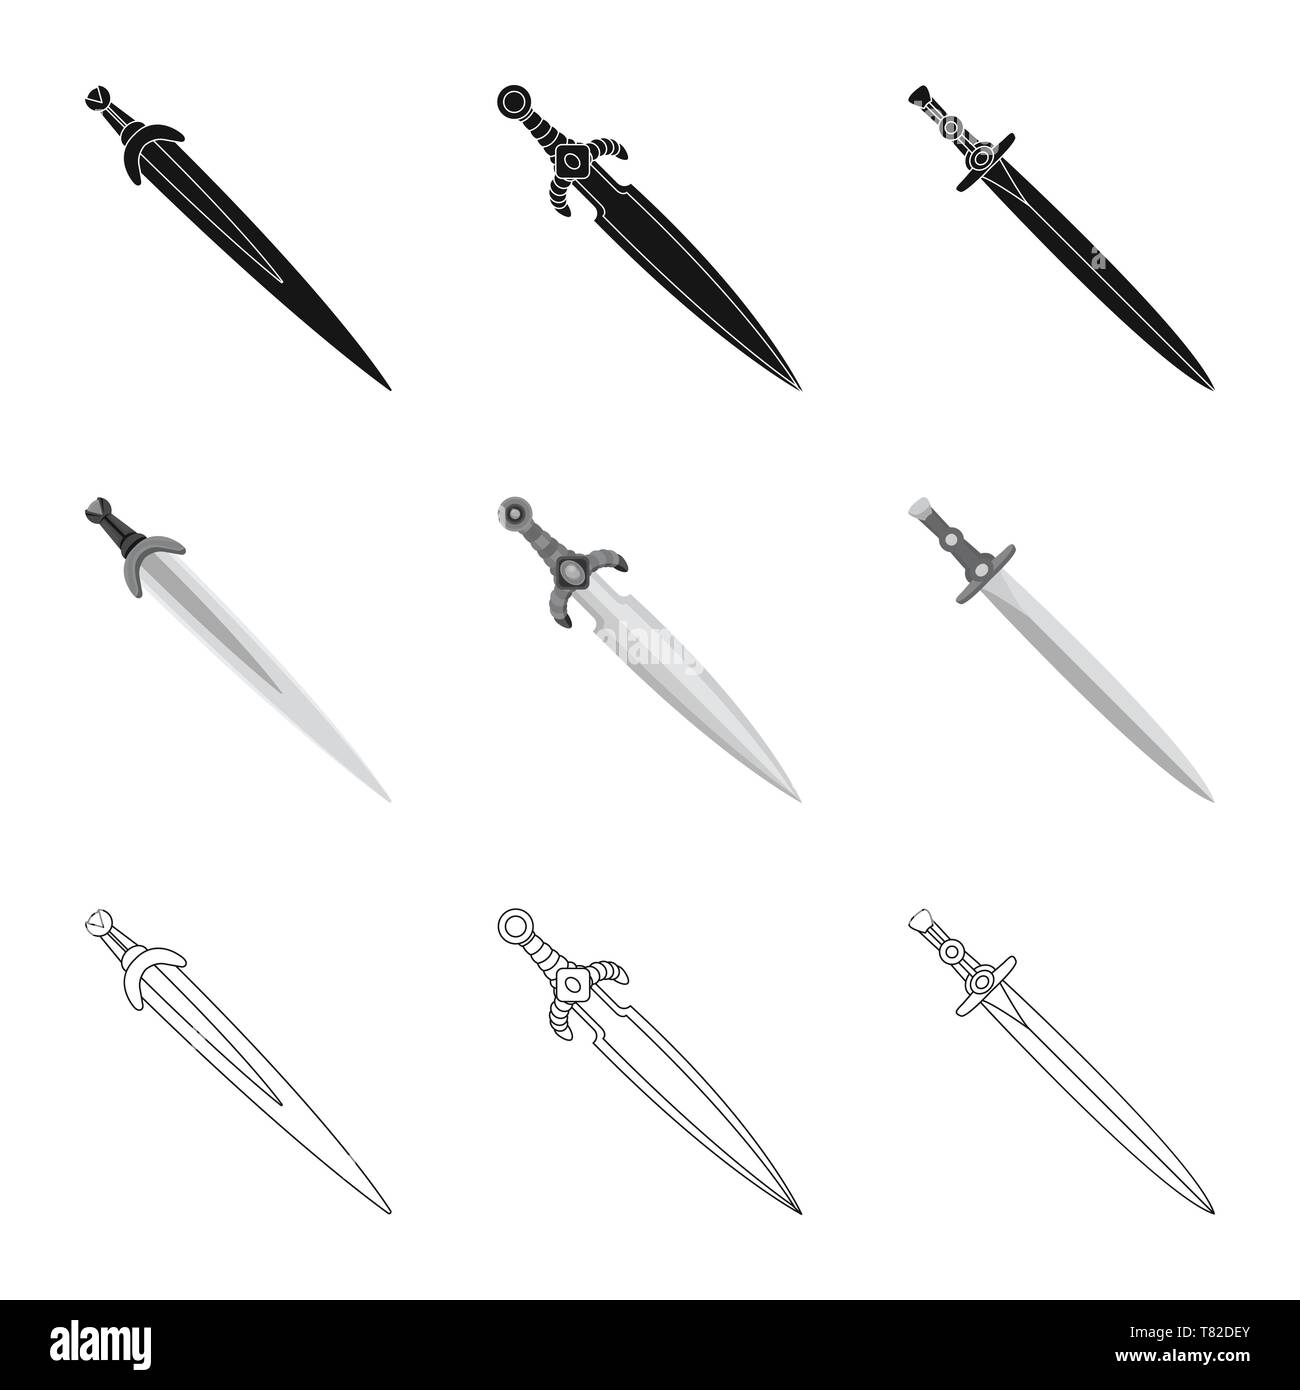 power,Spanish,longsword,handle,hilt,conqueror,decoration,steel,star,silver,gold,ornament,murder,copper,soldier,stone,warrior,ruby,military,fantasy,game,armor,sharp,blade,sword,dagger,knife,weapon,saber,medieval,set,vector,icon,illustration,isolated,collection,design,element,graphic,sign, Vector Vectors , Stock Vector